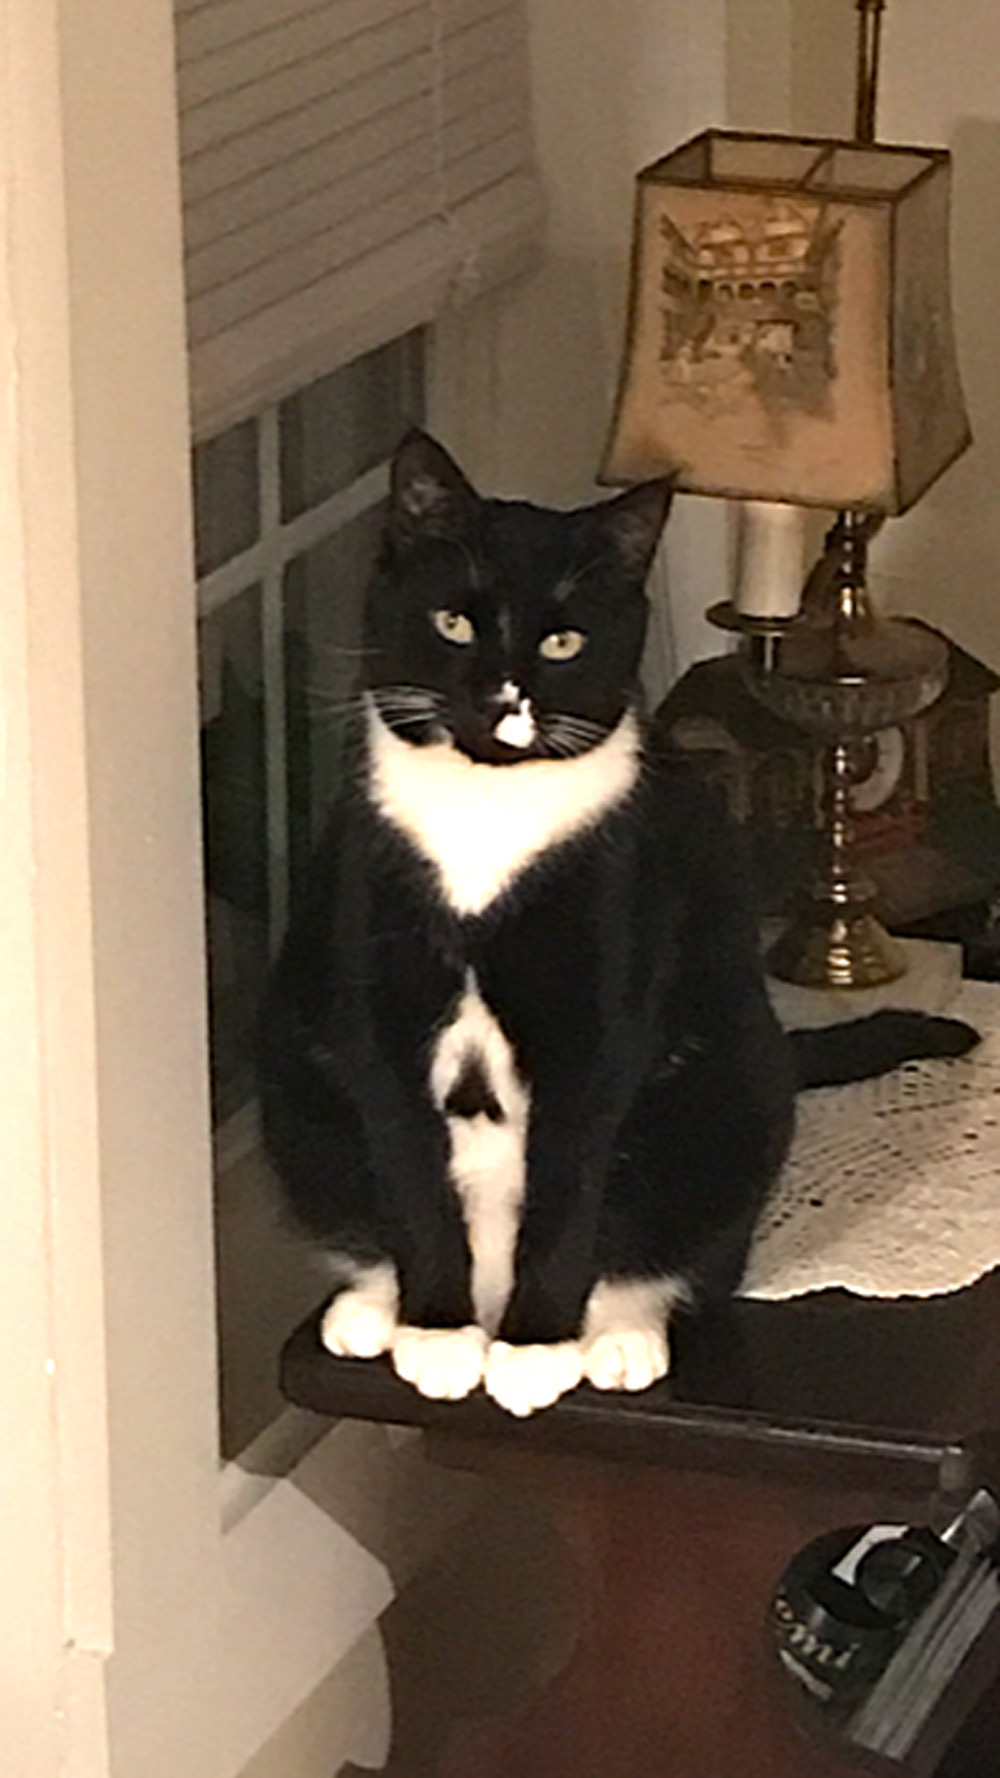 Meet Ace. He’s a 9-year-old tuxedo cat who has a unique black heart on his tummy and a white “thumbs up” on his nose.